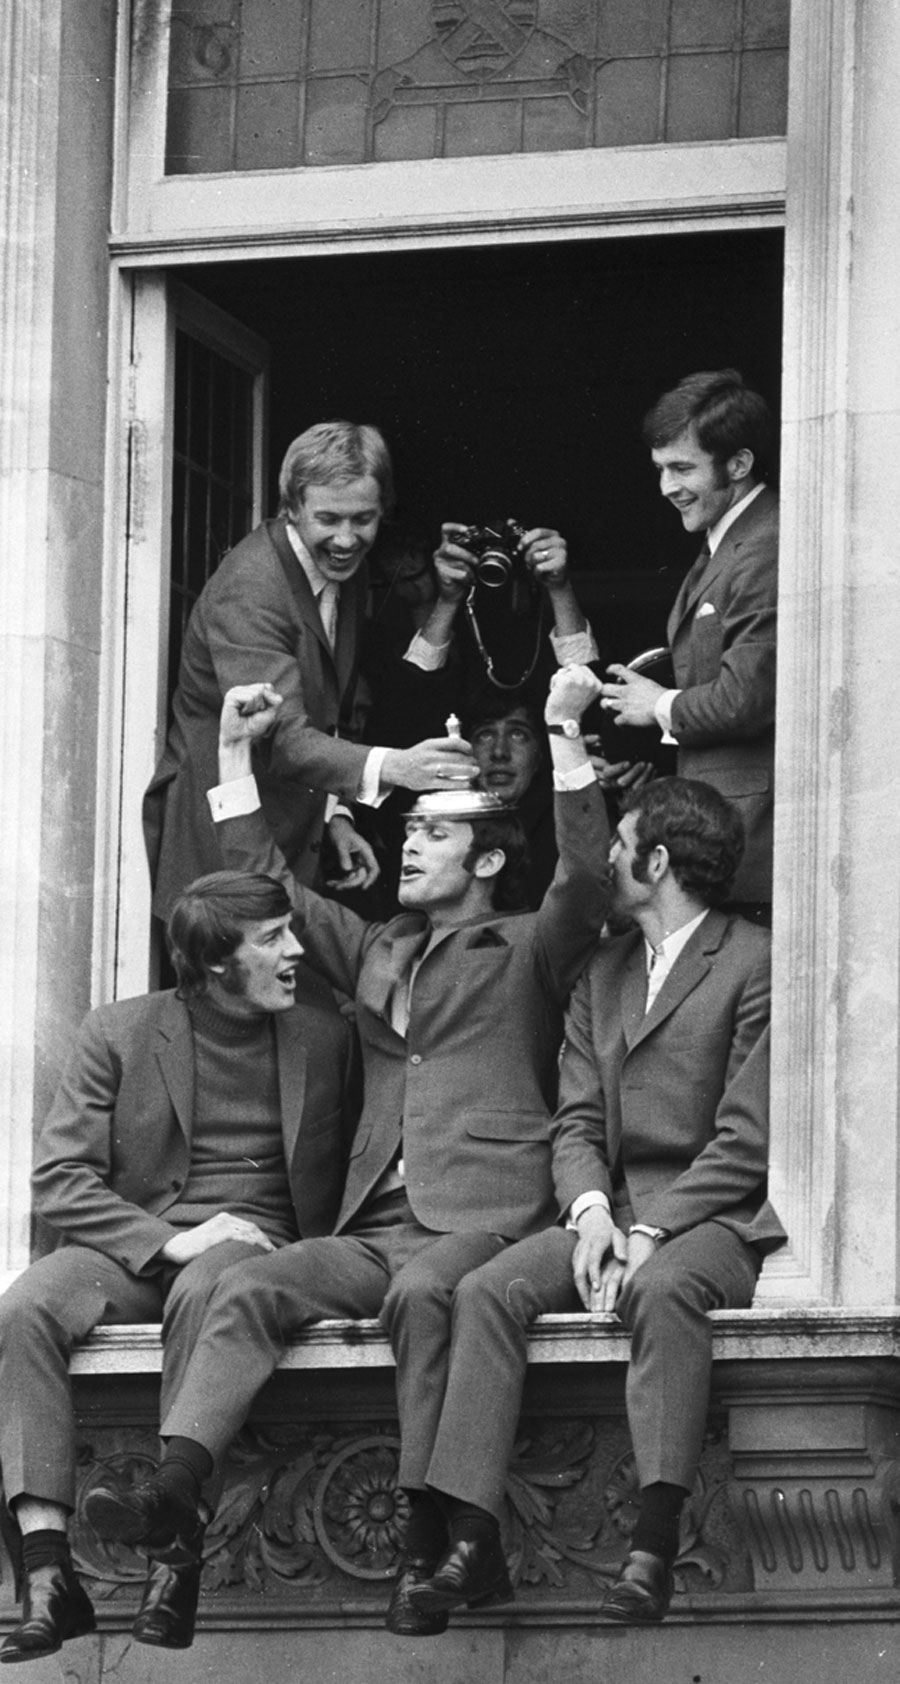 Chelsea players celebrate their FA Cup win, precariously placed on a balcony